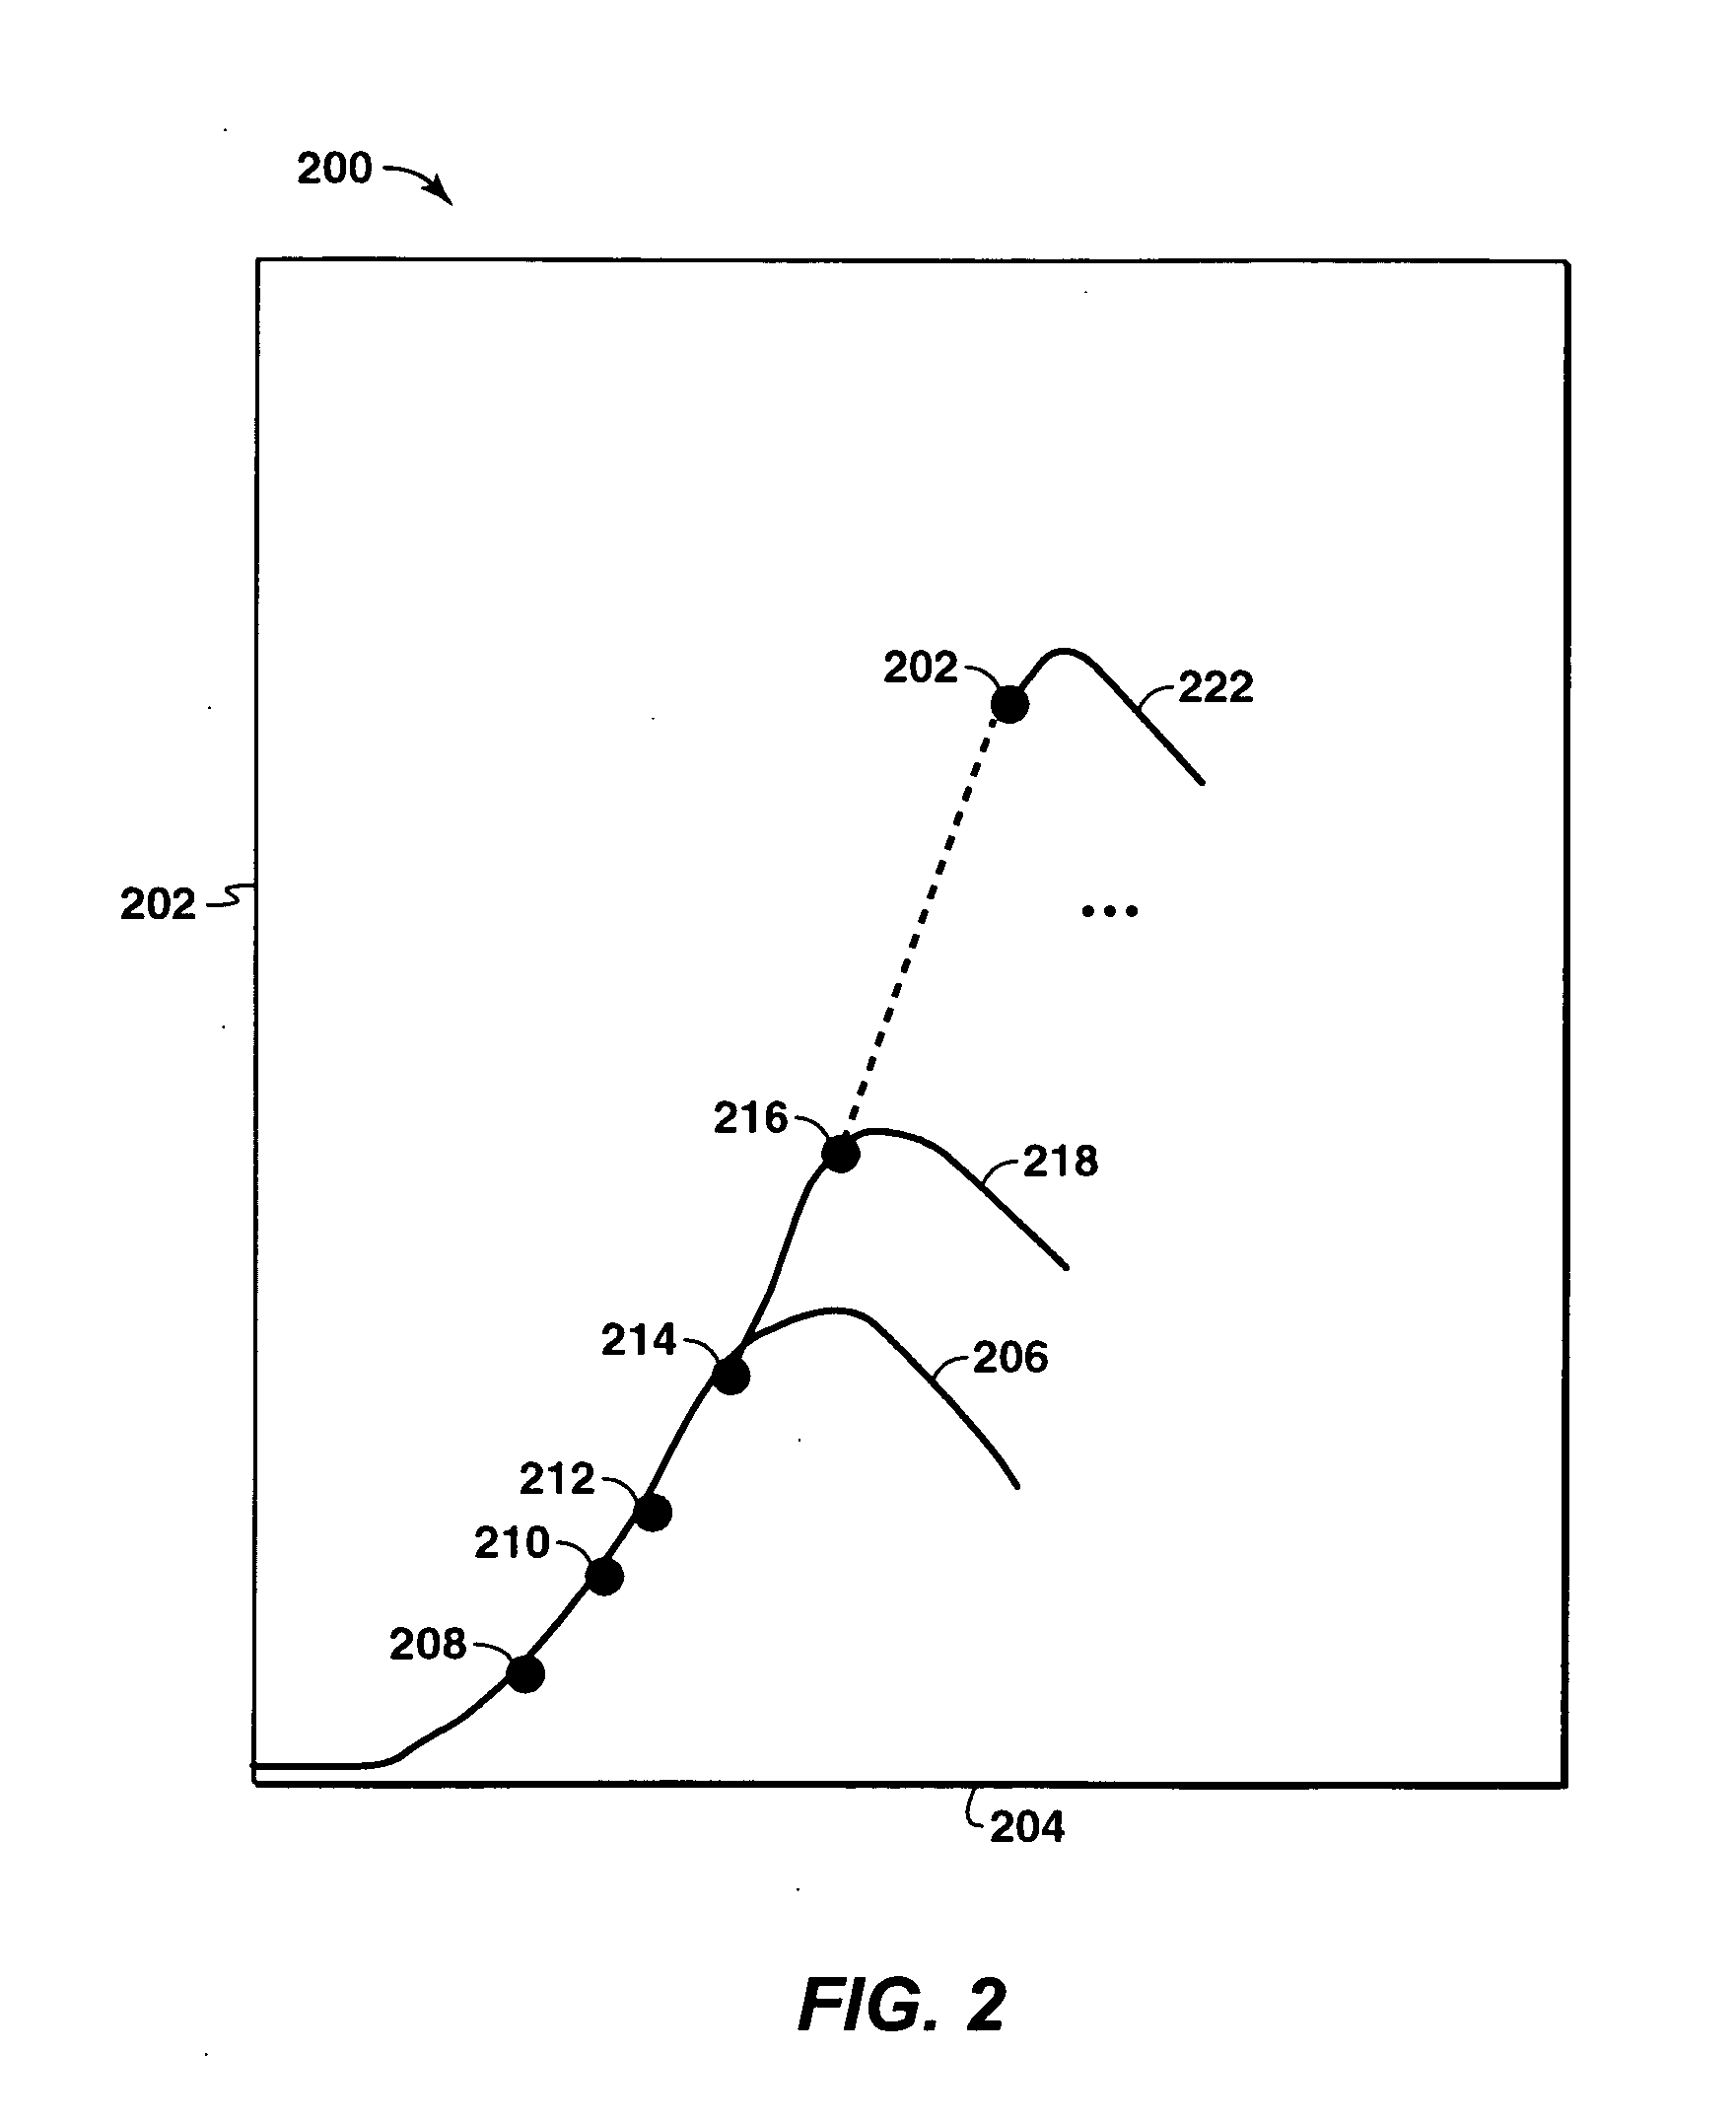 Method of Drilling and Production Hydrocarbons from Subsurface Formations